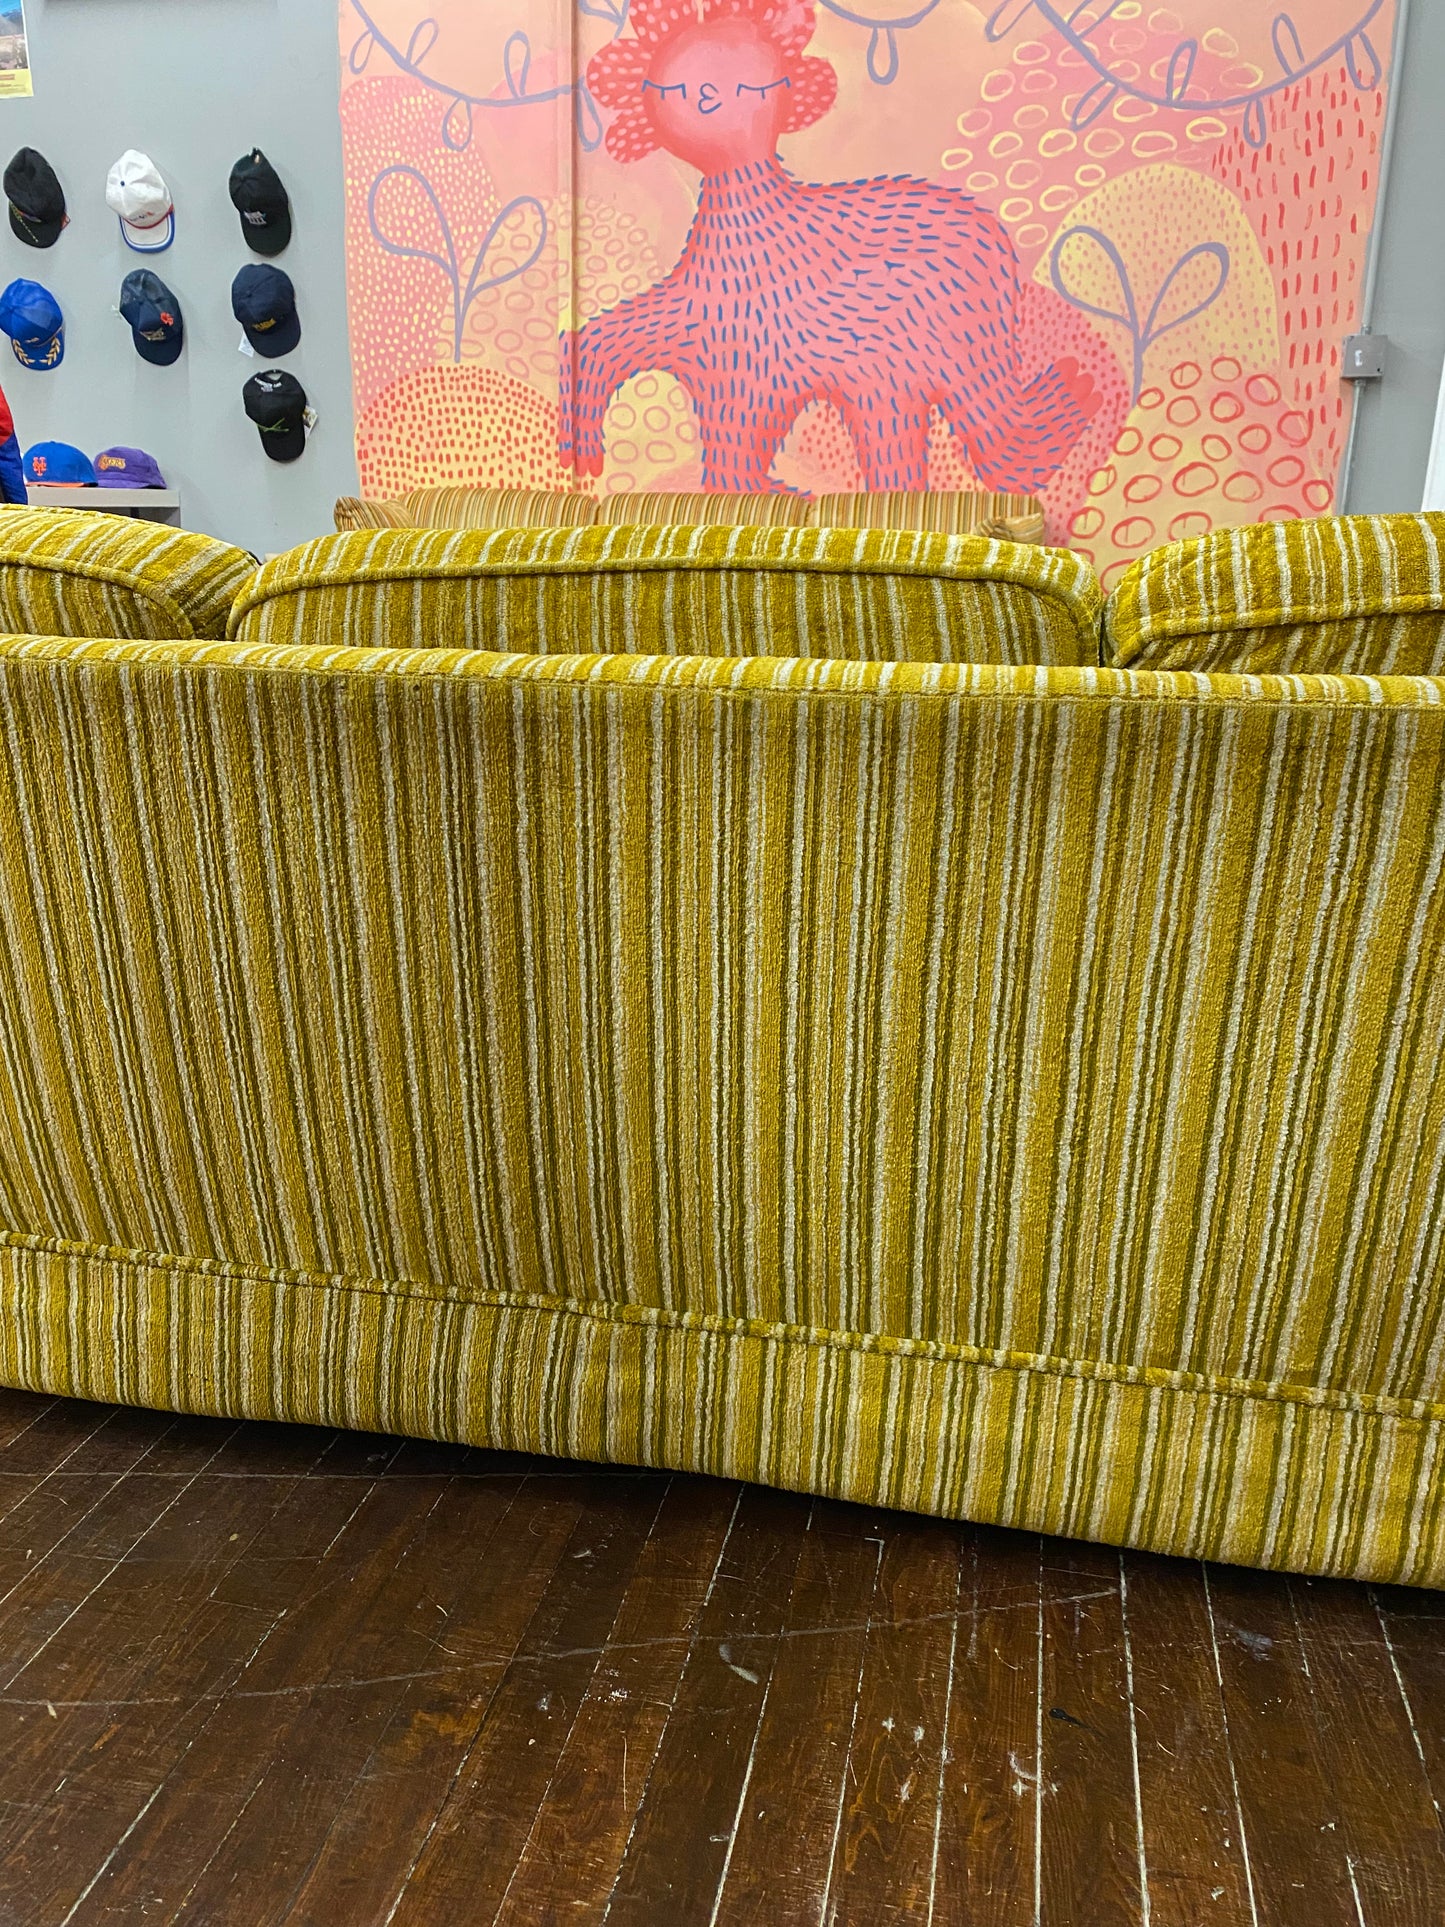 Vintage 1970s Dwyer’s Brothers Yellow Velour Sofa